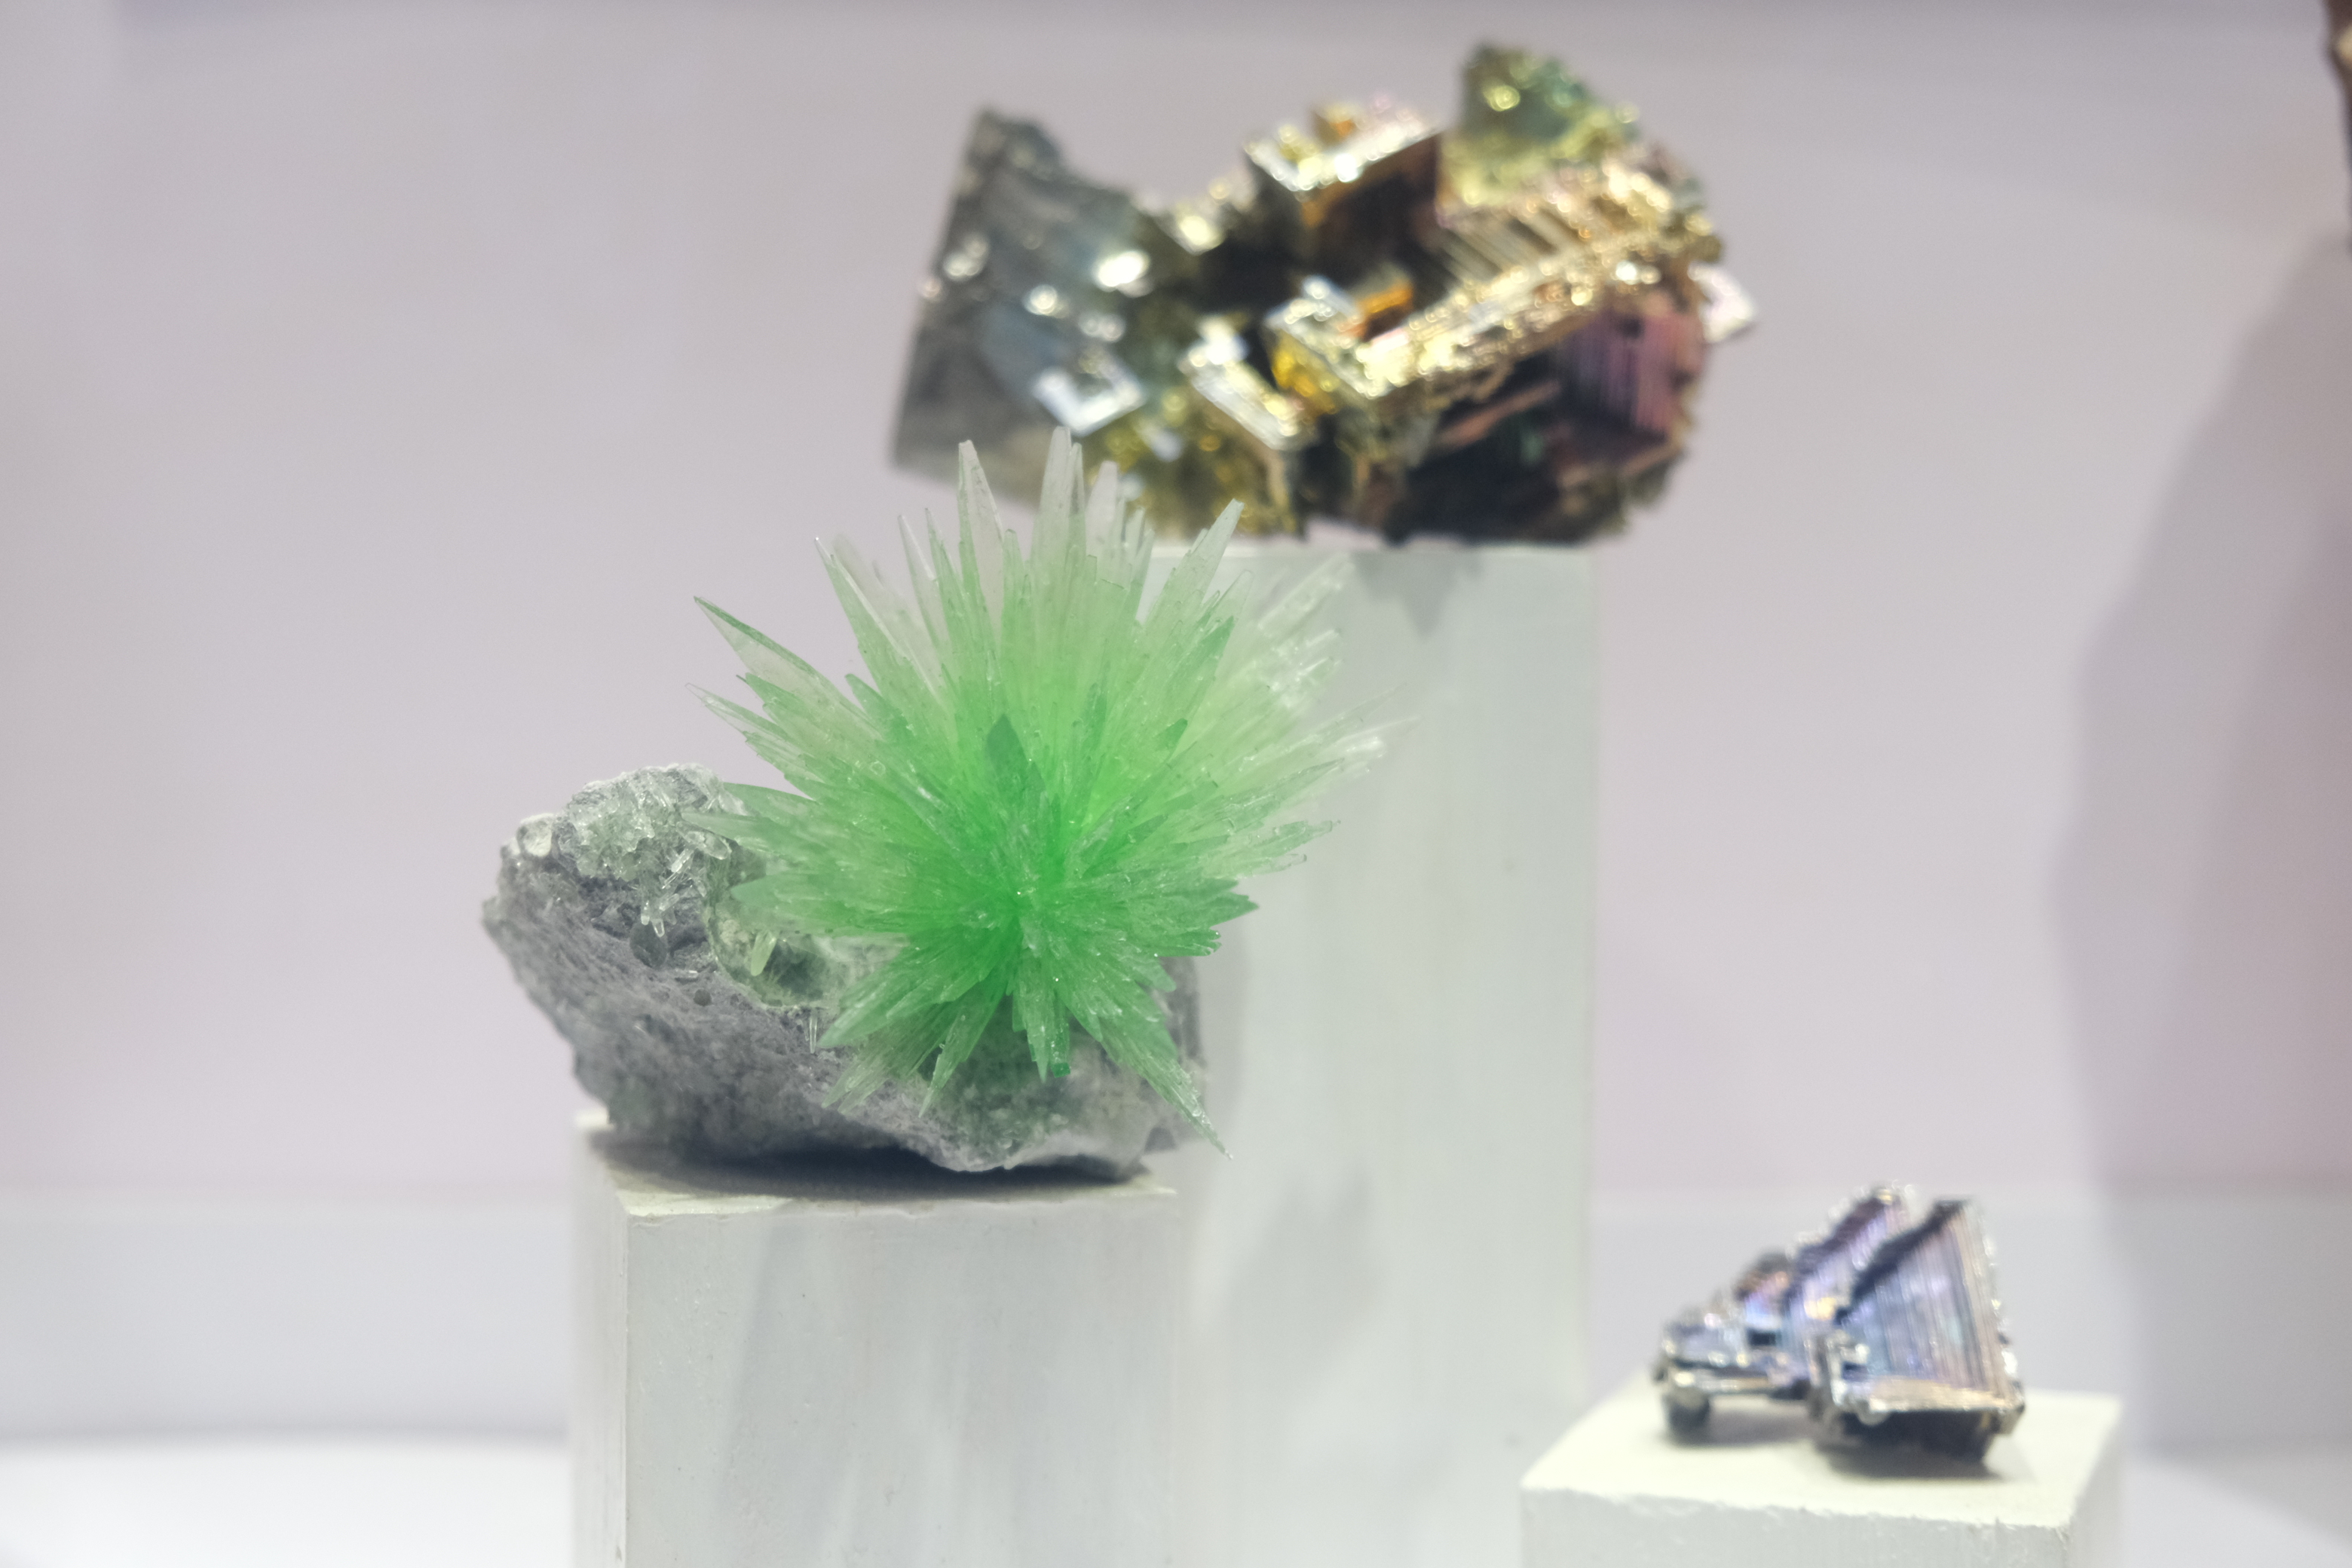 A piece of crystal Tuyen made from nitrogen-containing fertilizers on volcanic rock. Photo: Ngoc Phuong / Tuoi Tre News